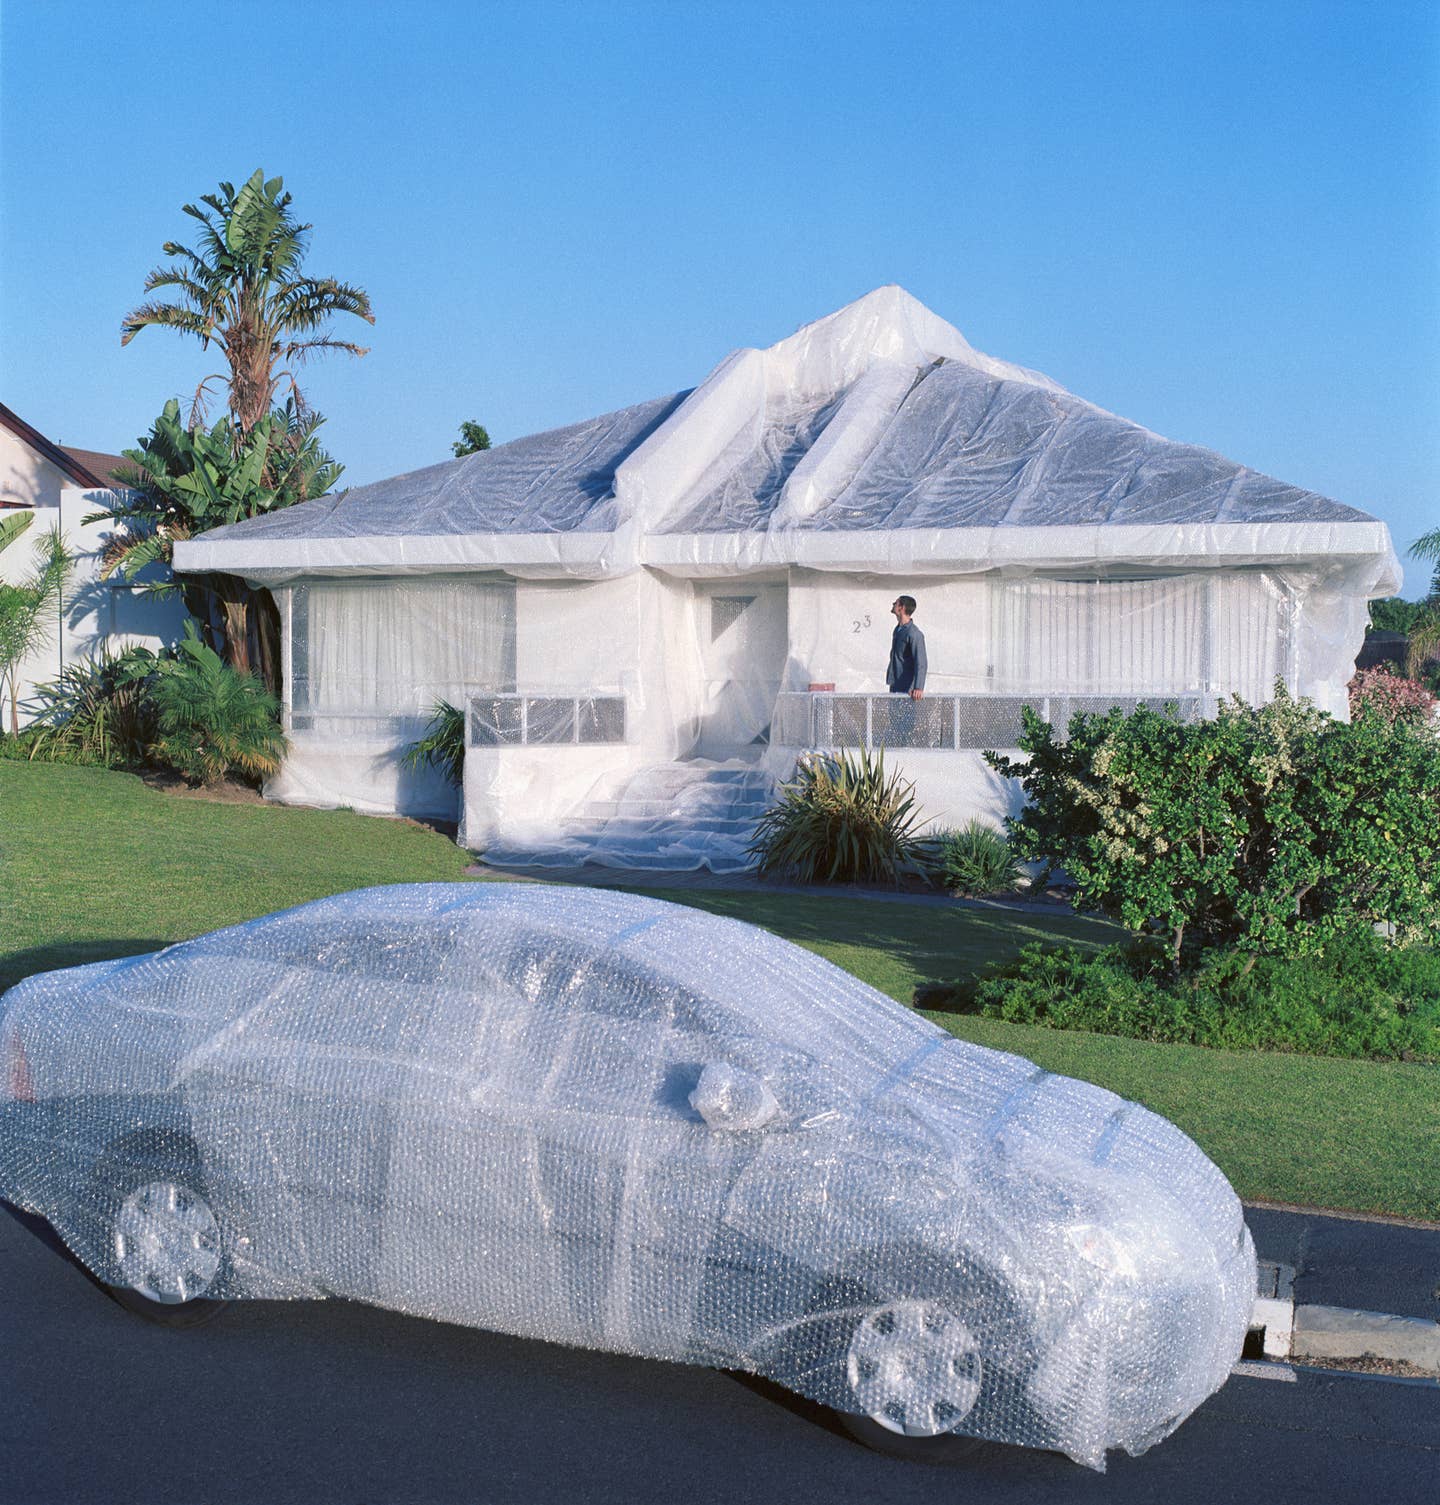 Bubble wrapped car and house.